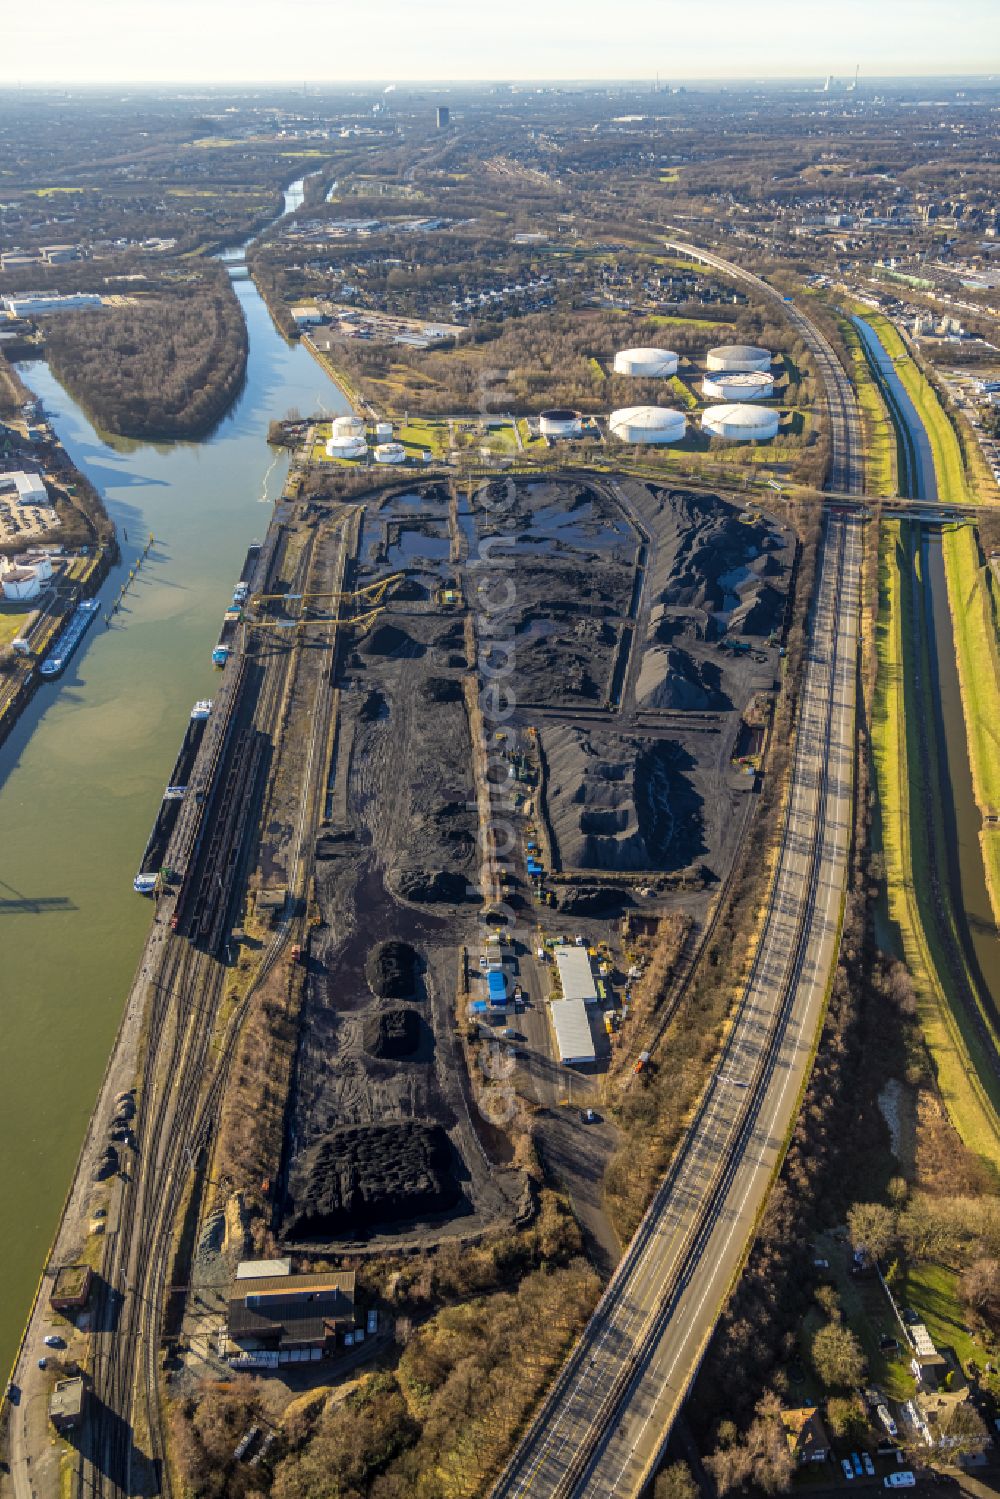 Aerial photograph Bottrop - Layers of a mining trunk at the Sturmshof in an industrial and commercial area with coal reserves in Bottrop in the state of North Rhine-Westphalia - NRW, Germany